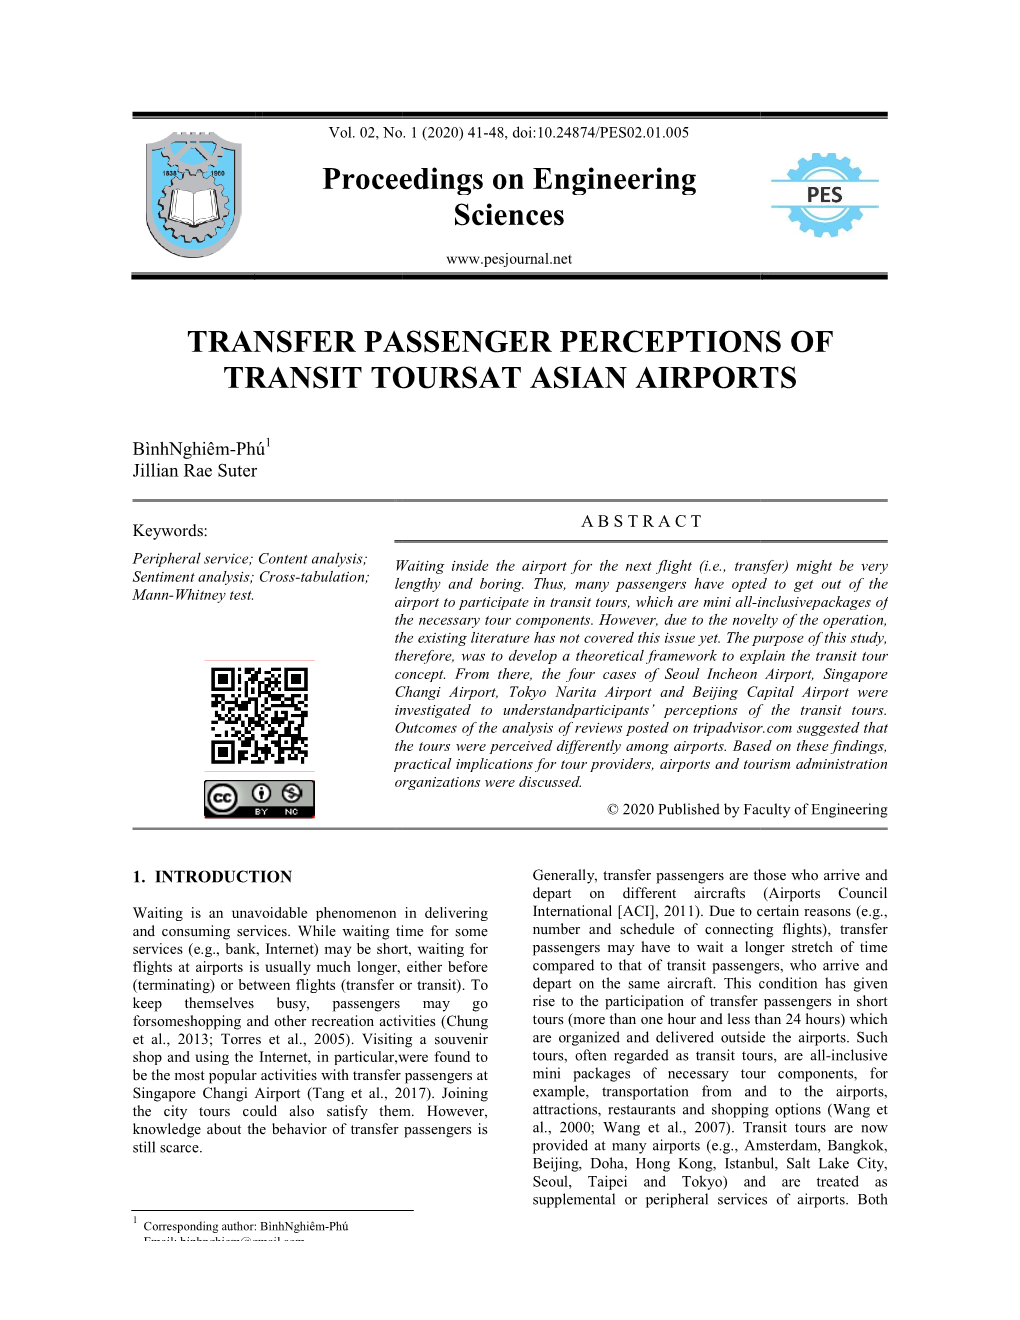 Transfer Passenger Perceptions of Transit Tours at Asian Airports